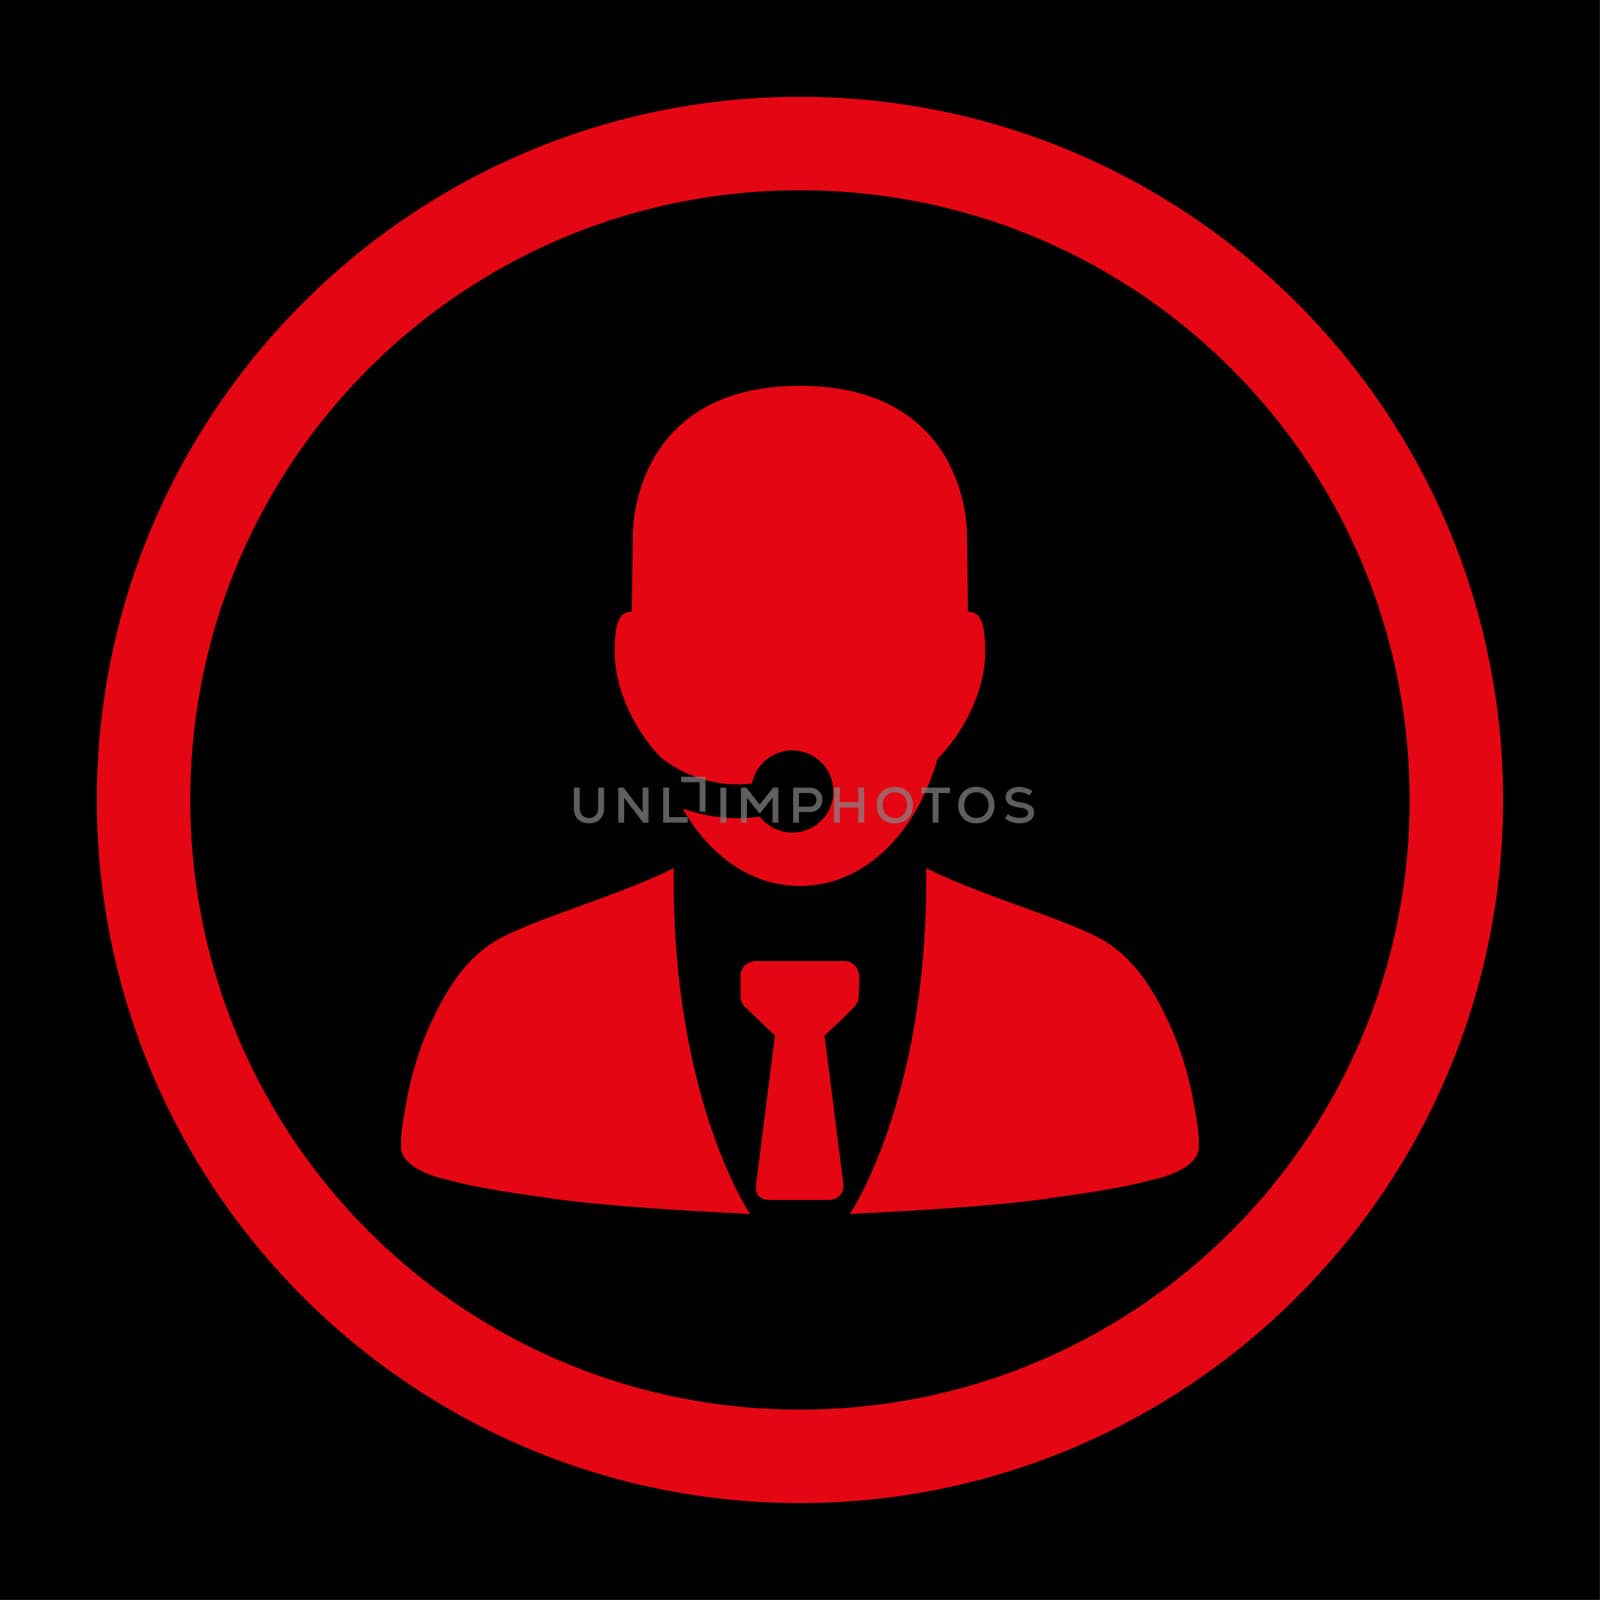 Call center operator glyph icon. This rounded flat symbol is drawn with red color on a black background.